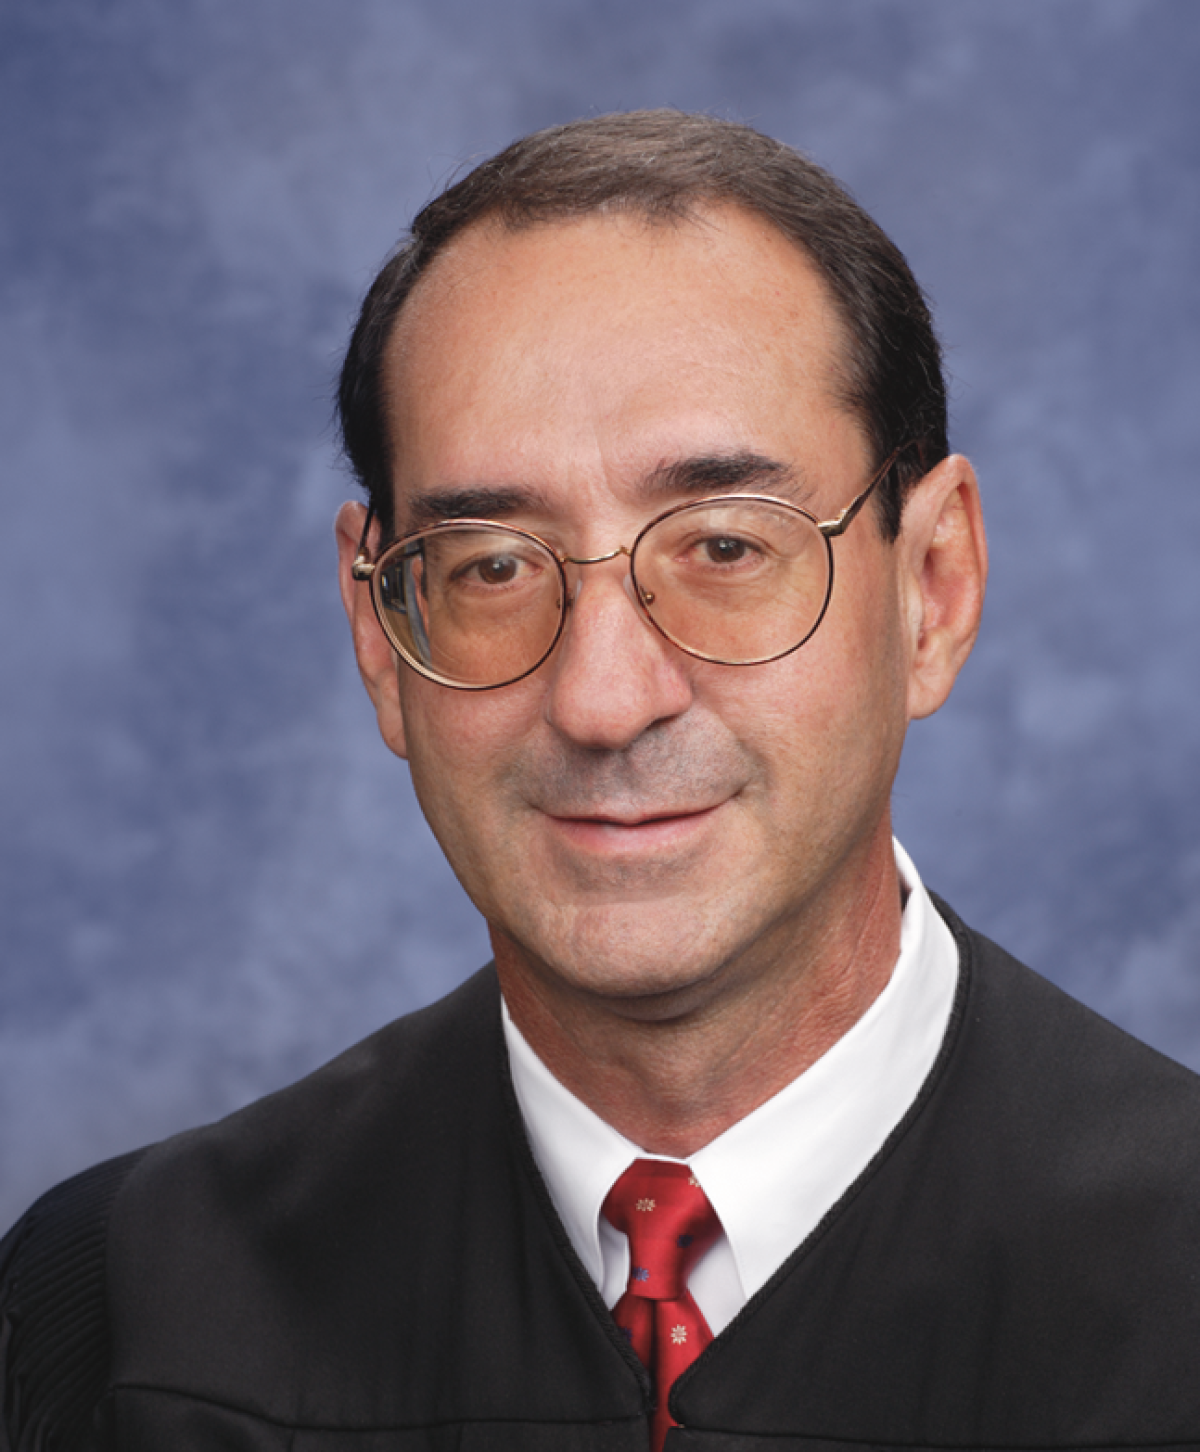 U.S. District Court Judge Roger Benitez, who is well known for striking down gun laws.